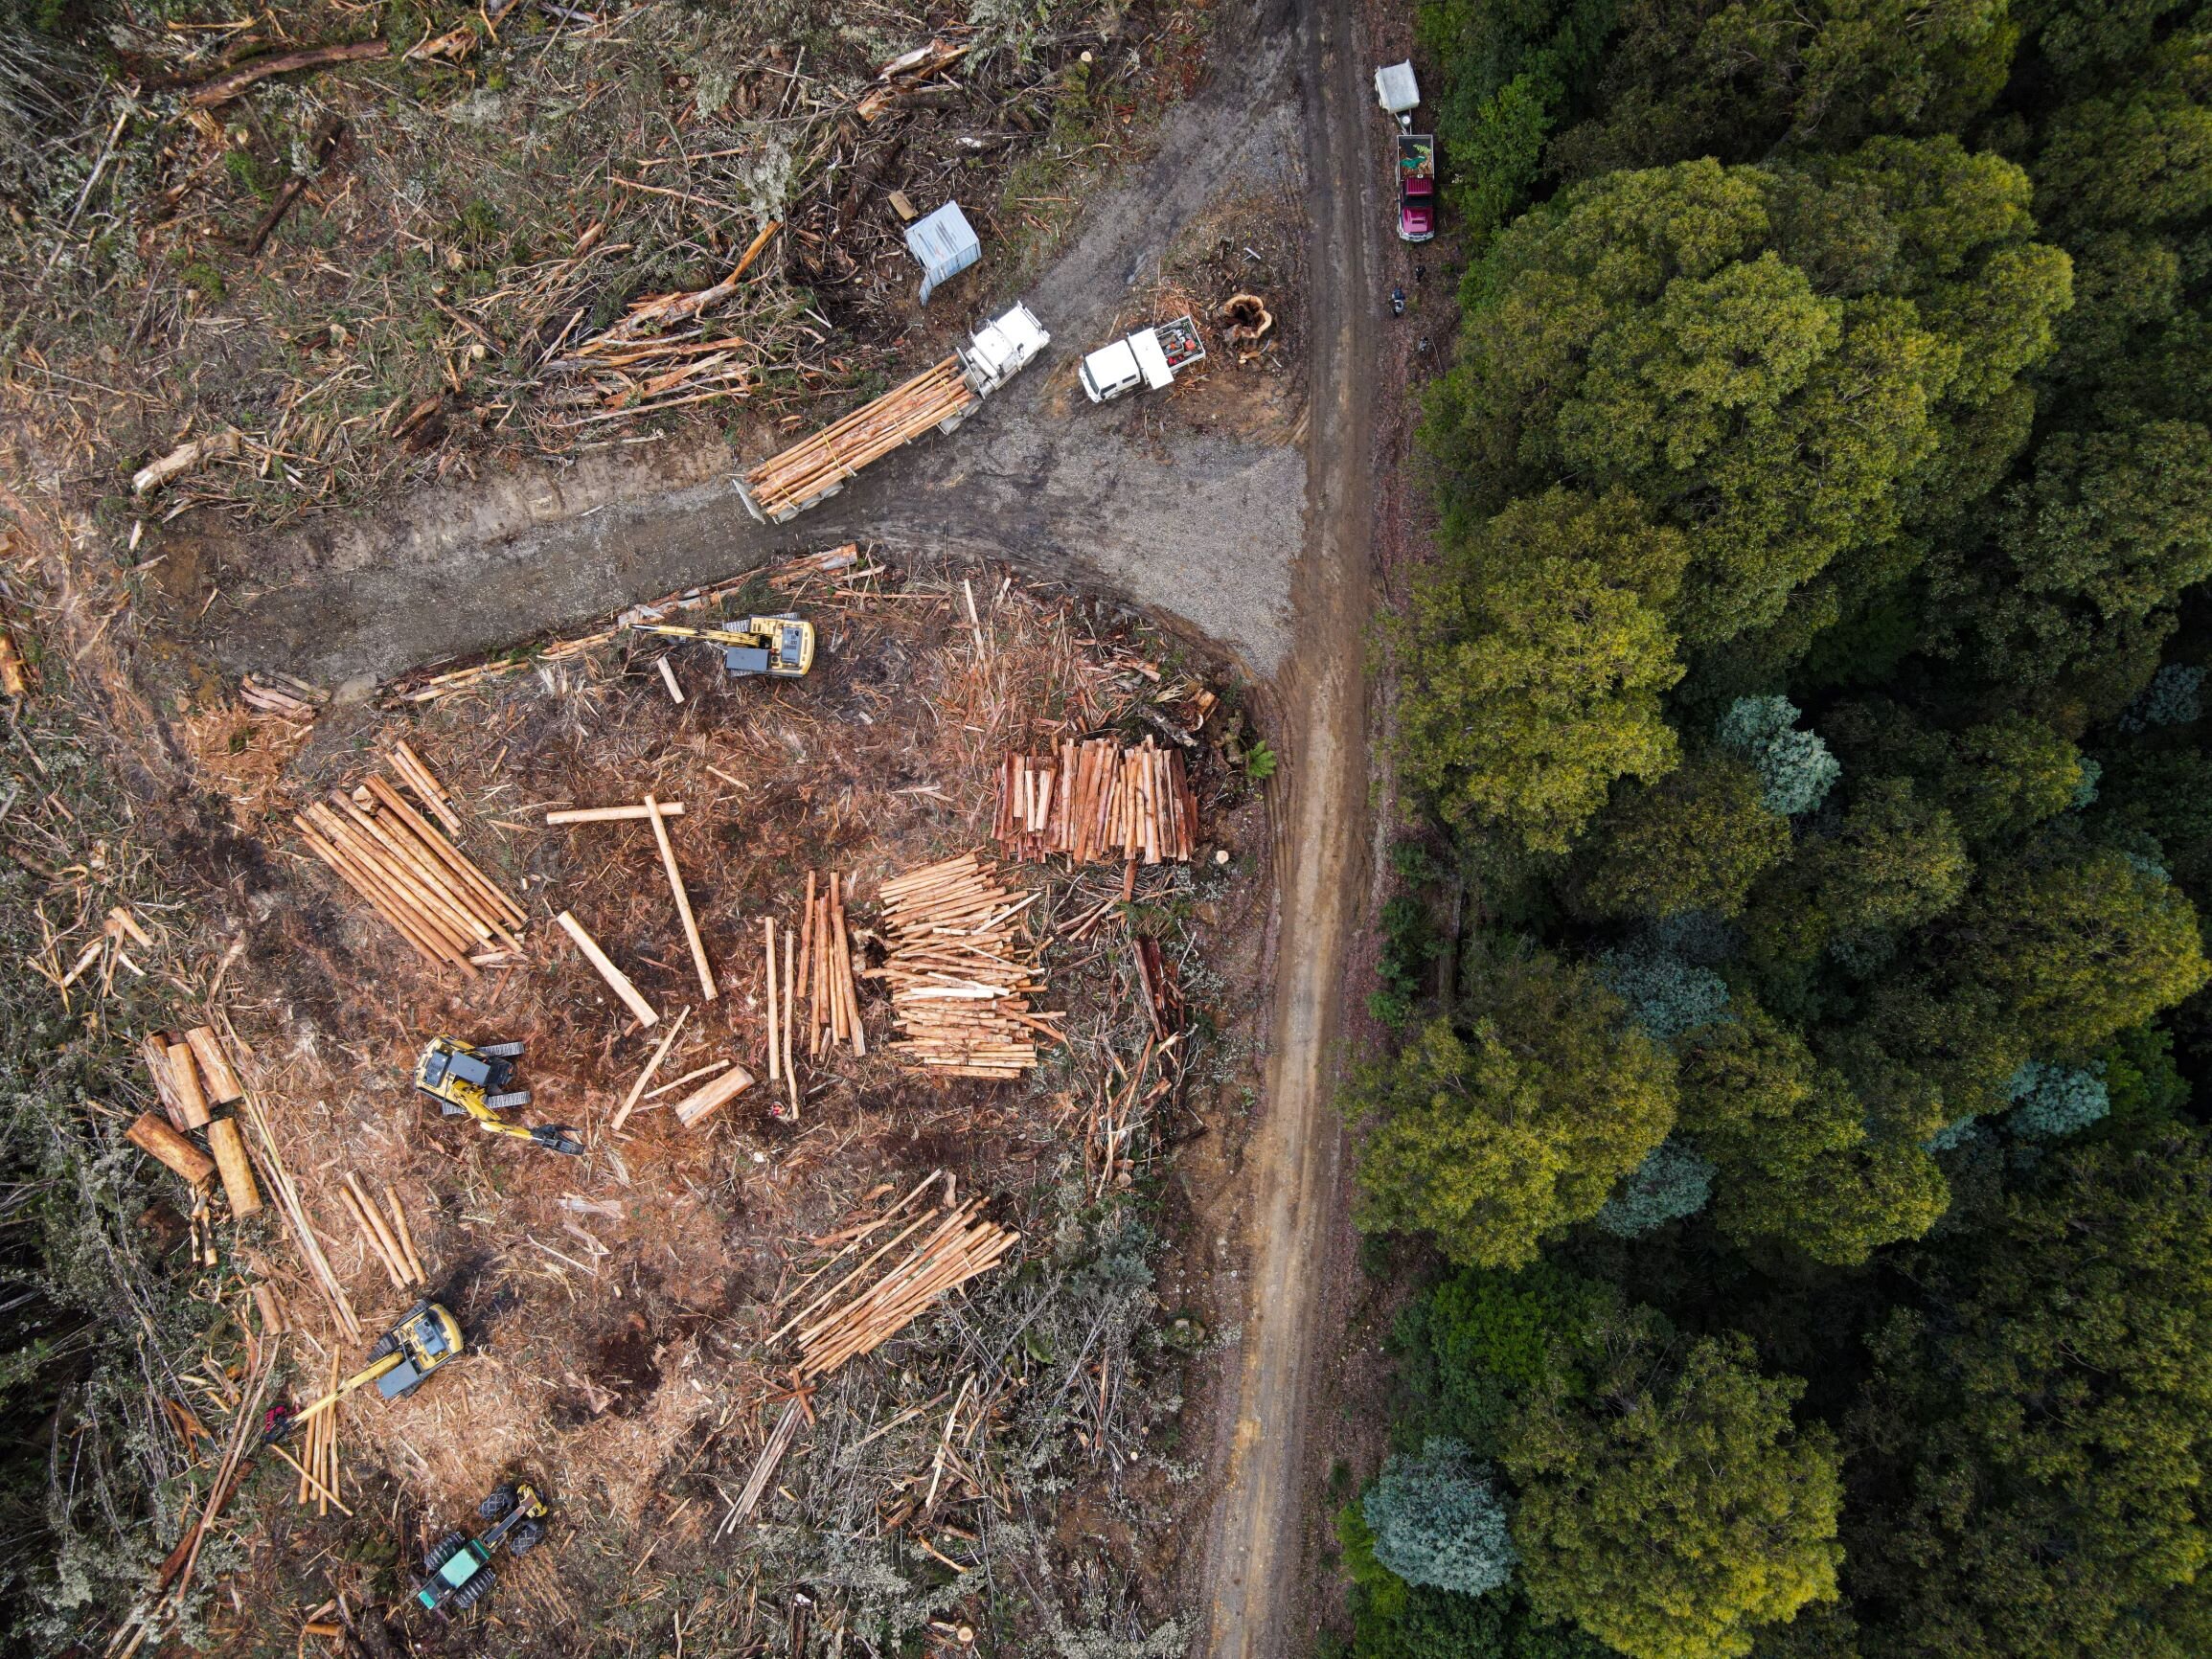  A logging operation within Old Growth rainforest in Tarkine, Tasmania. 